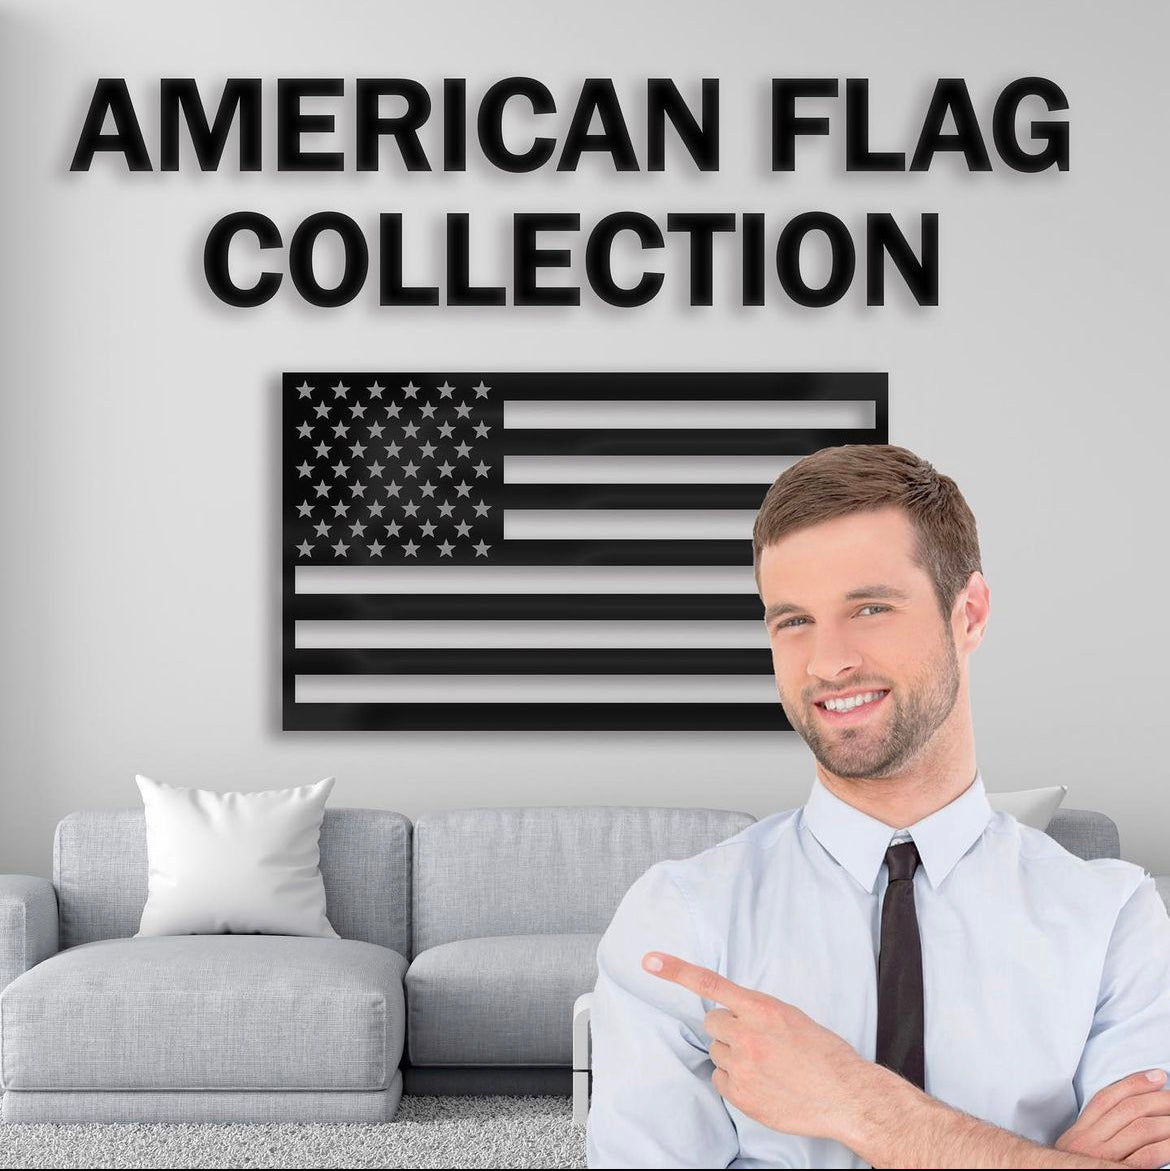 America Collection